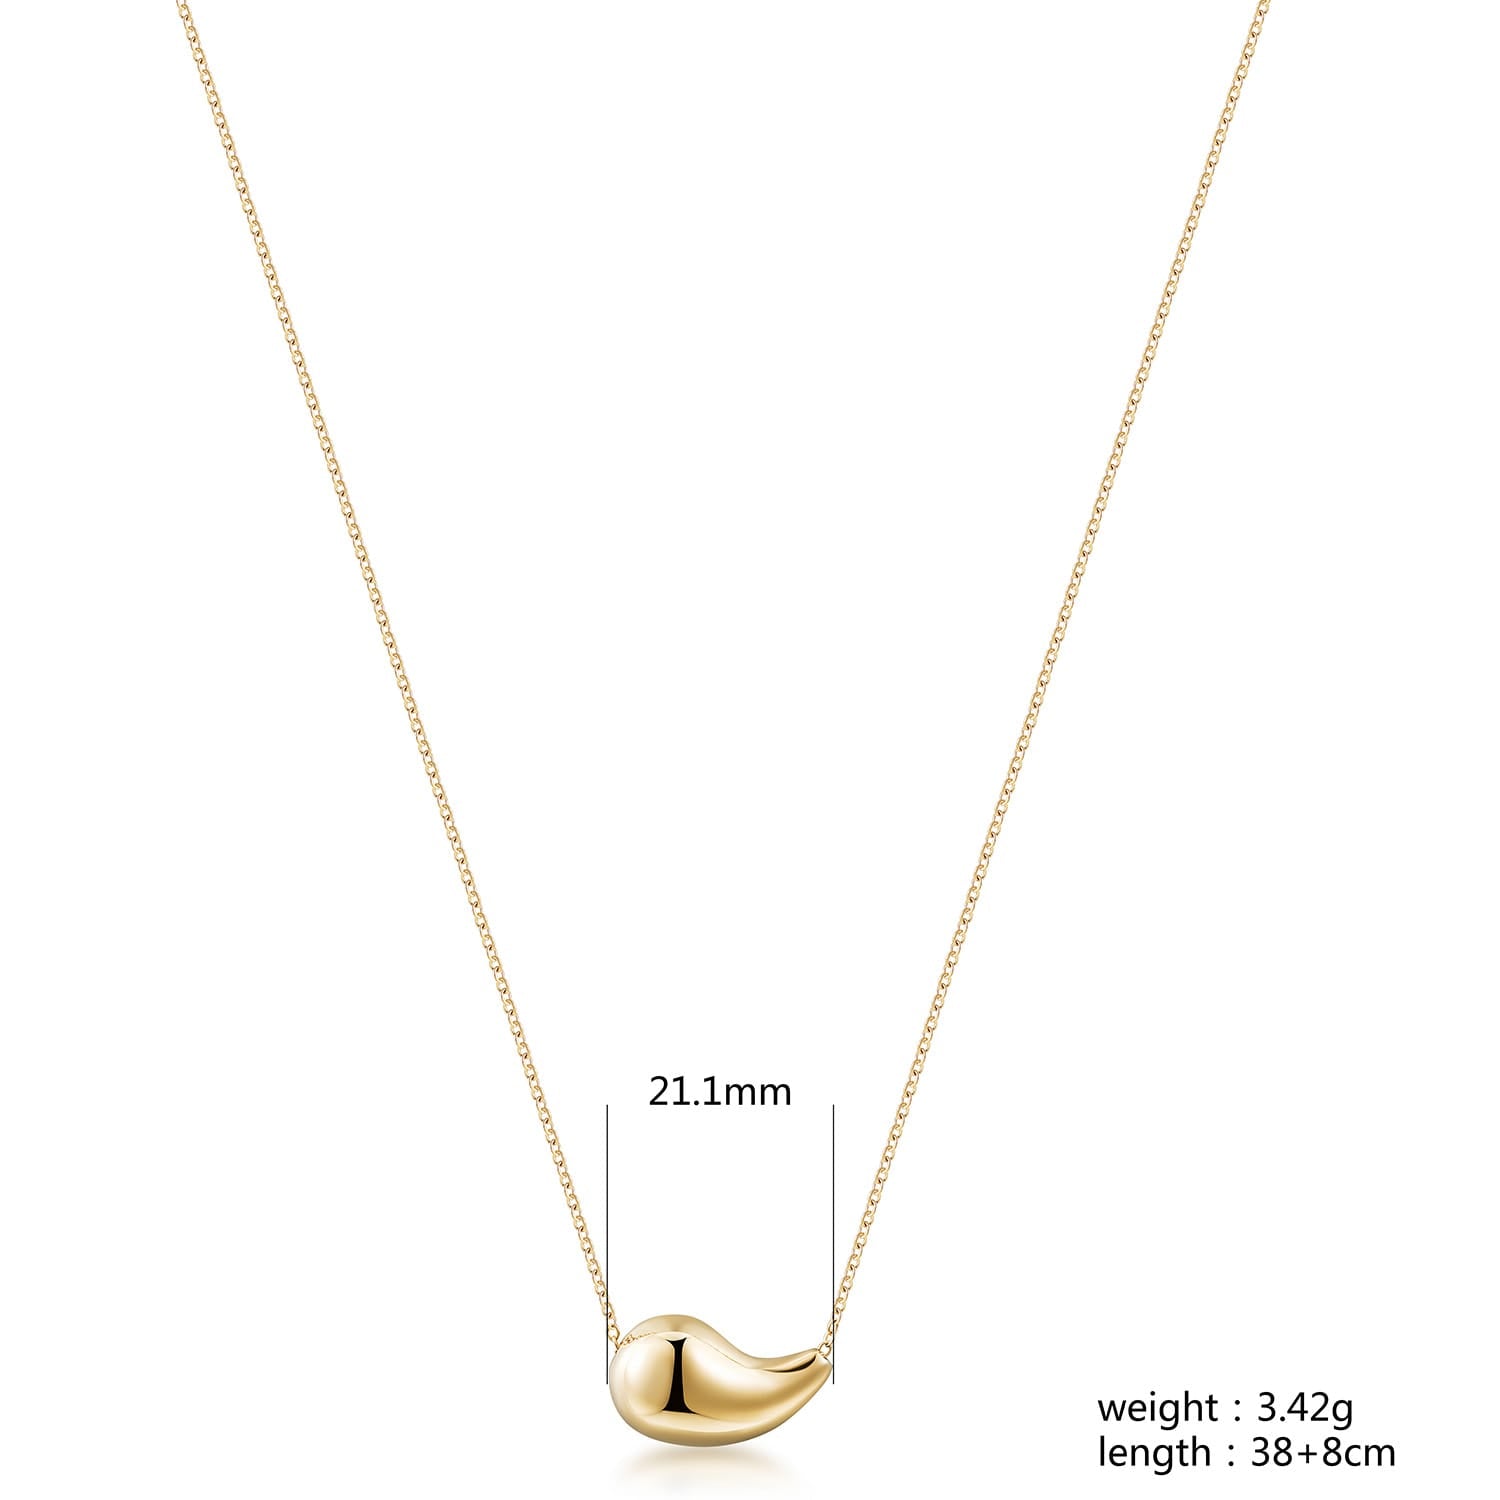 Gold stainless steel drop necklace